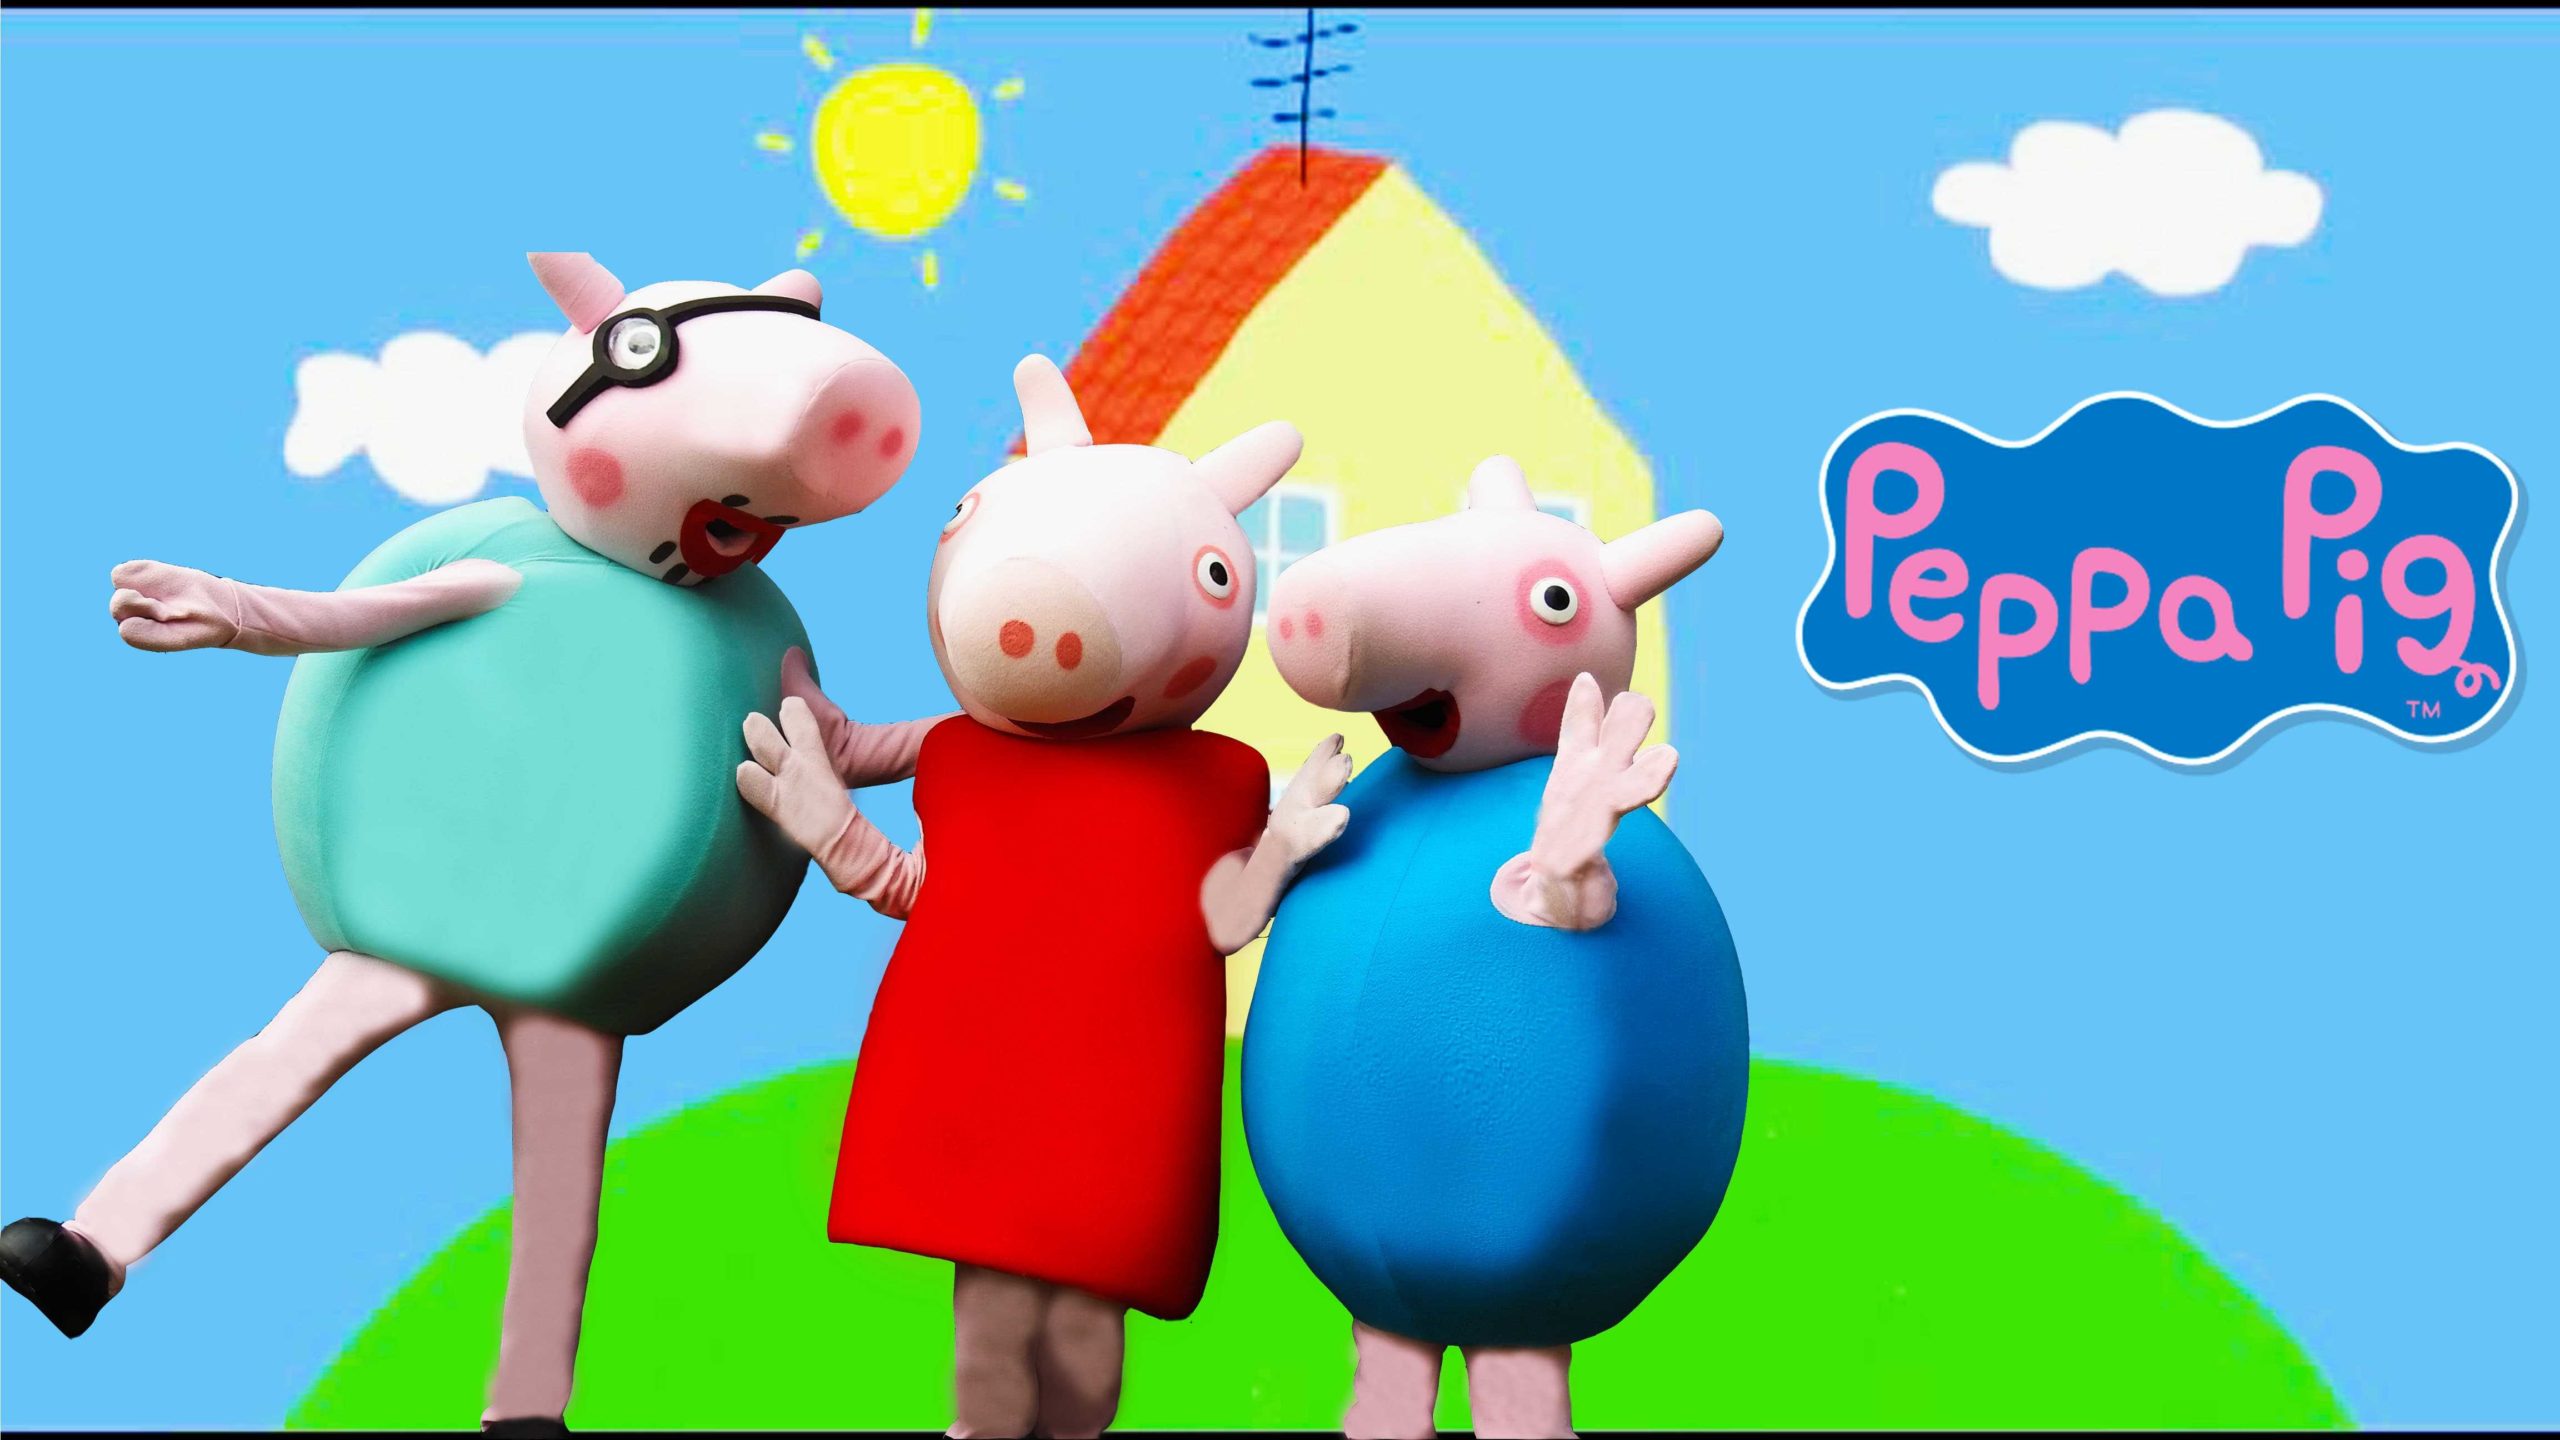 peppa pig house wallpaper for iphone